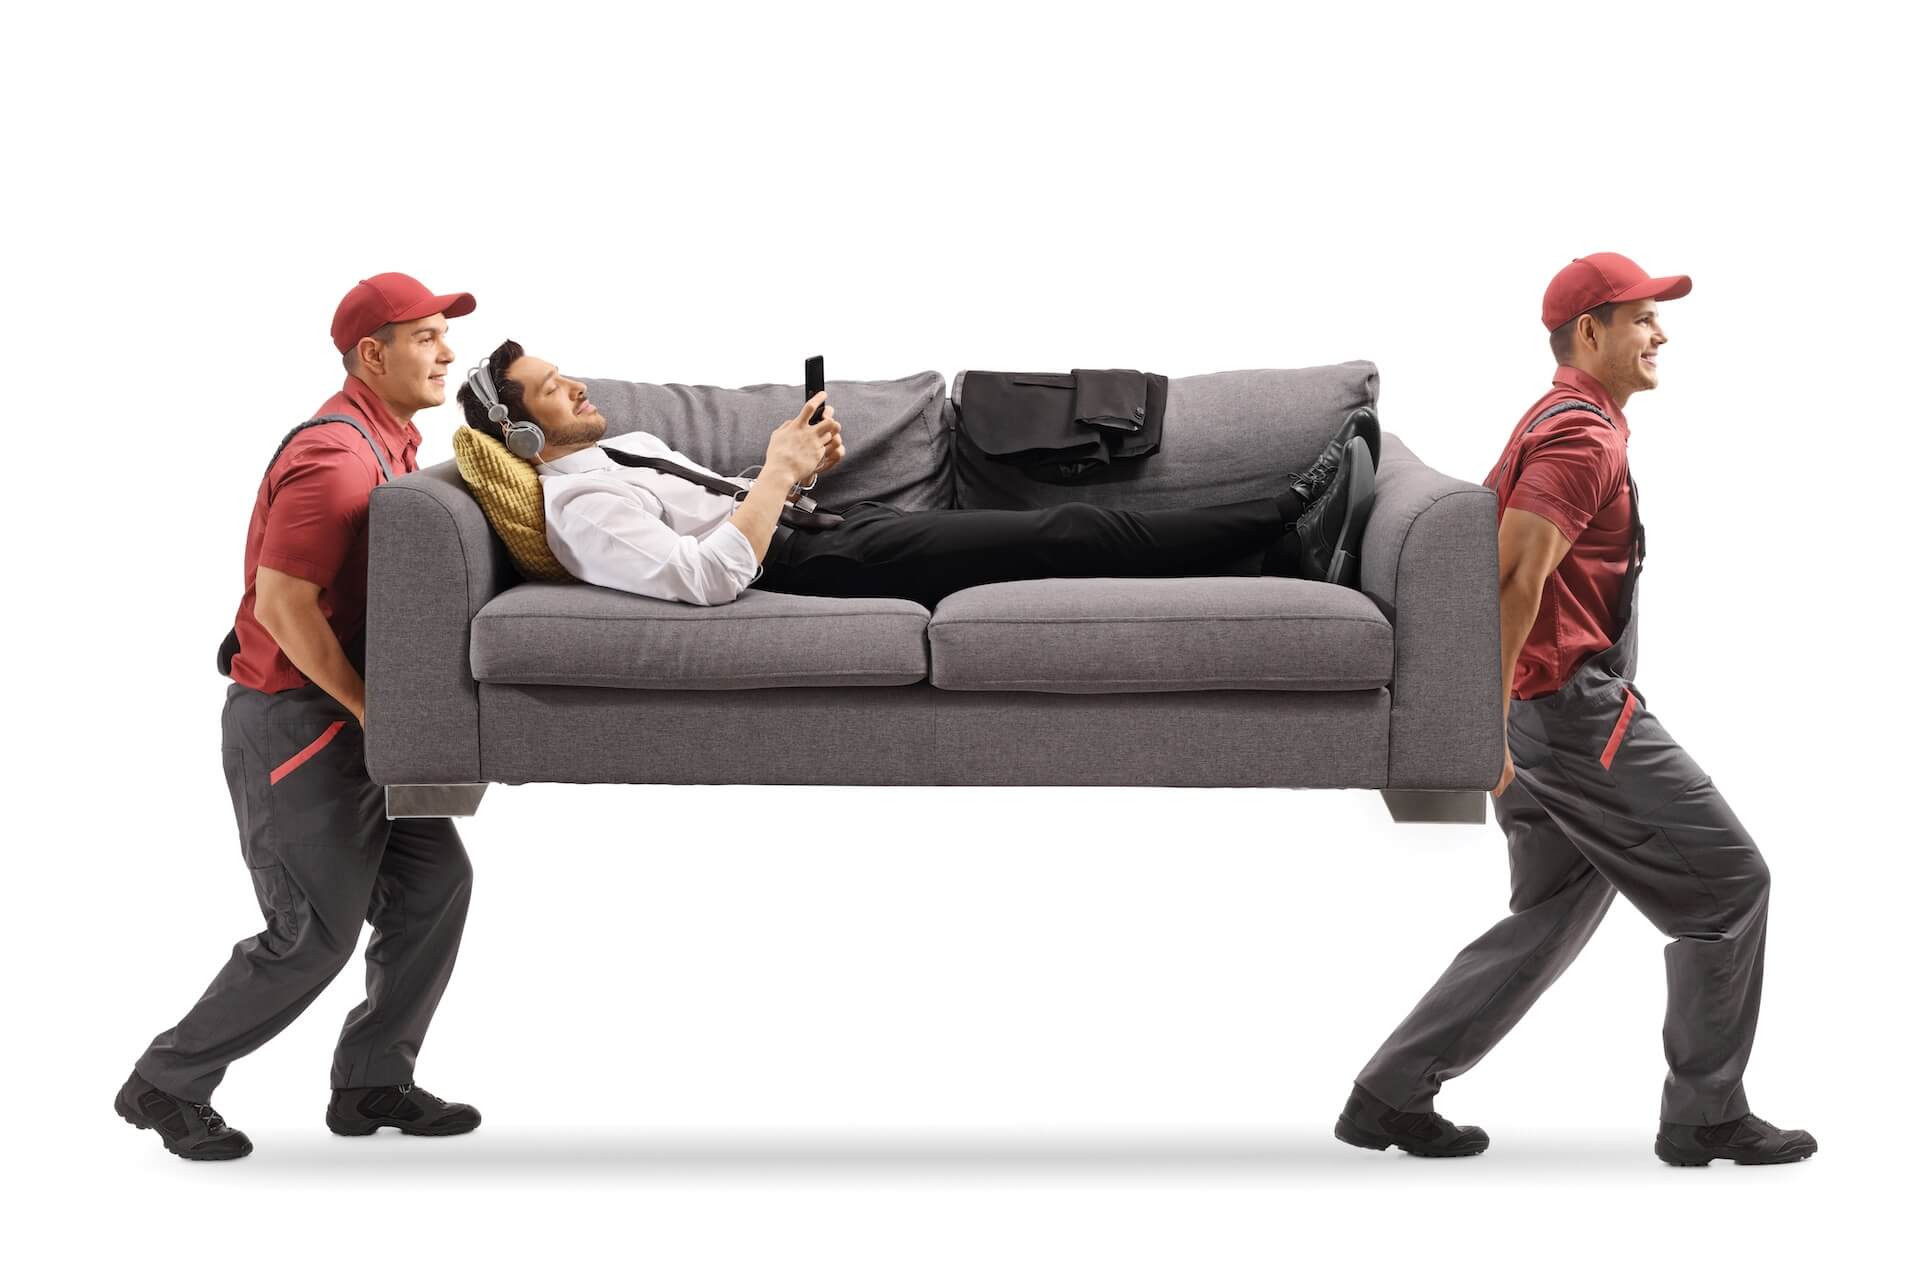 Two movers carrying a couch with a man lying on it